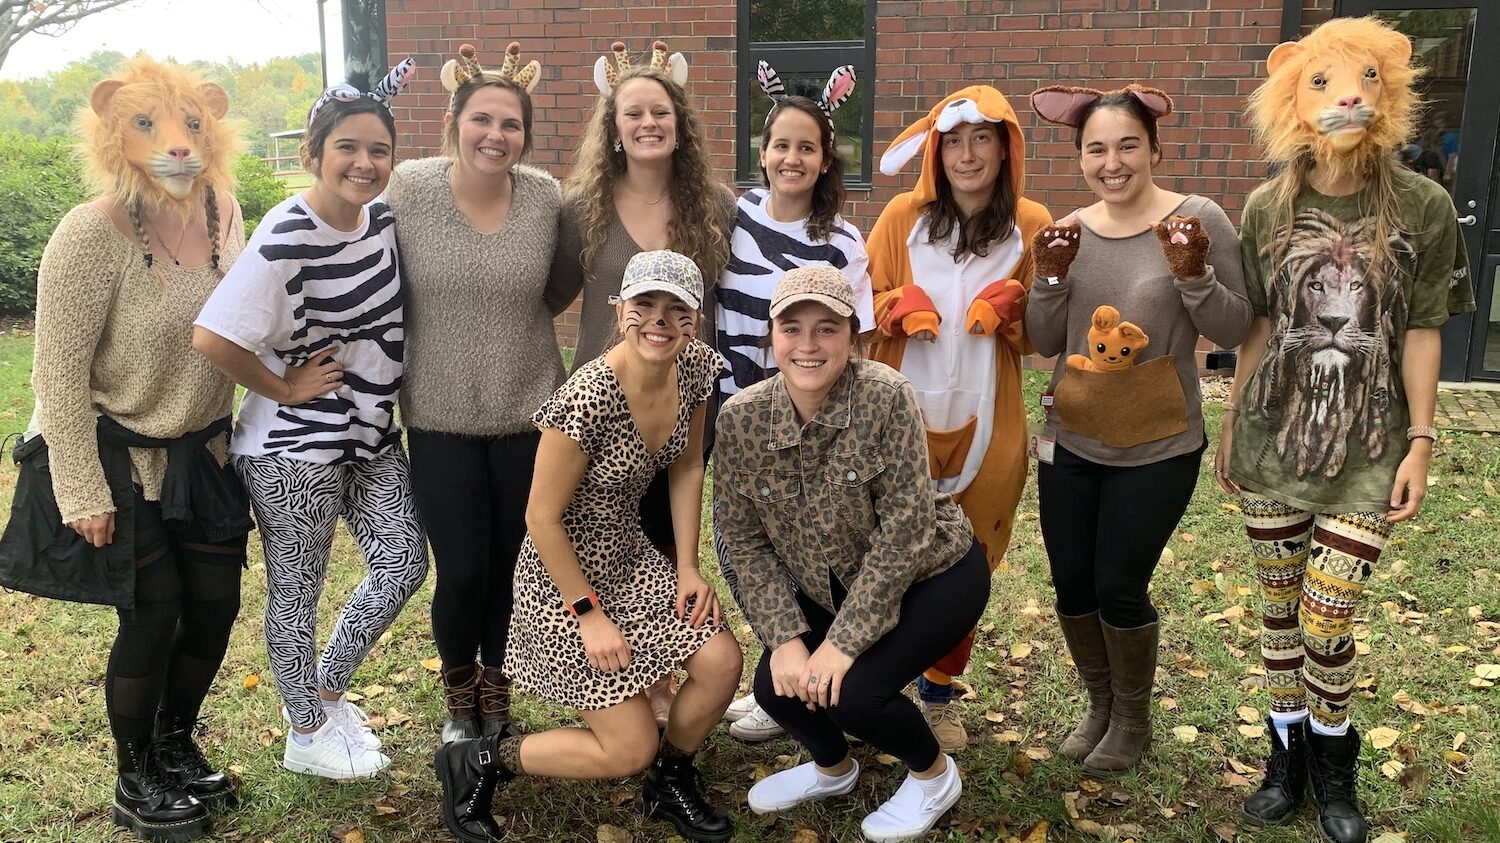 The Class of 2022 arrived at school dressed as Noah’s ark.